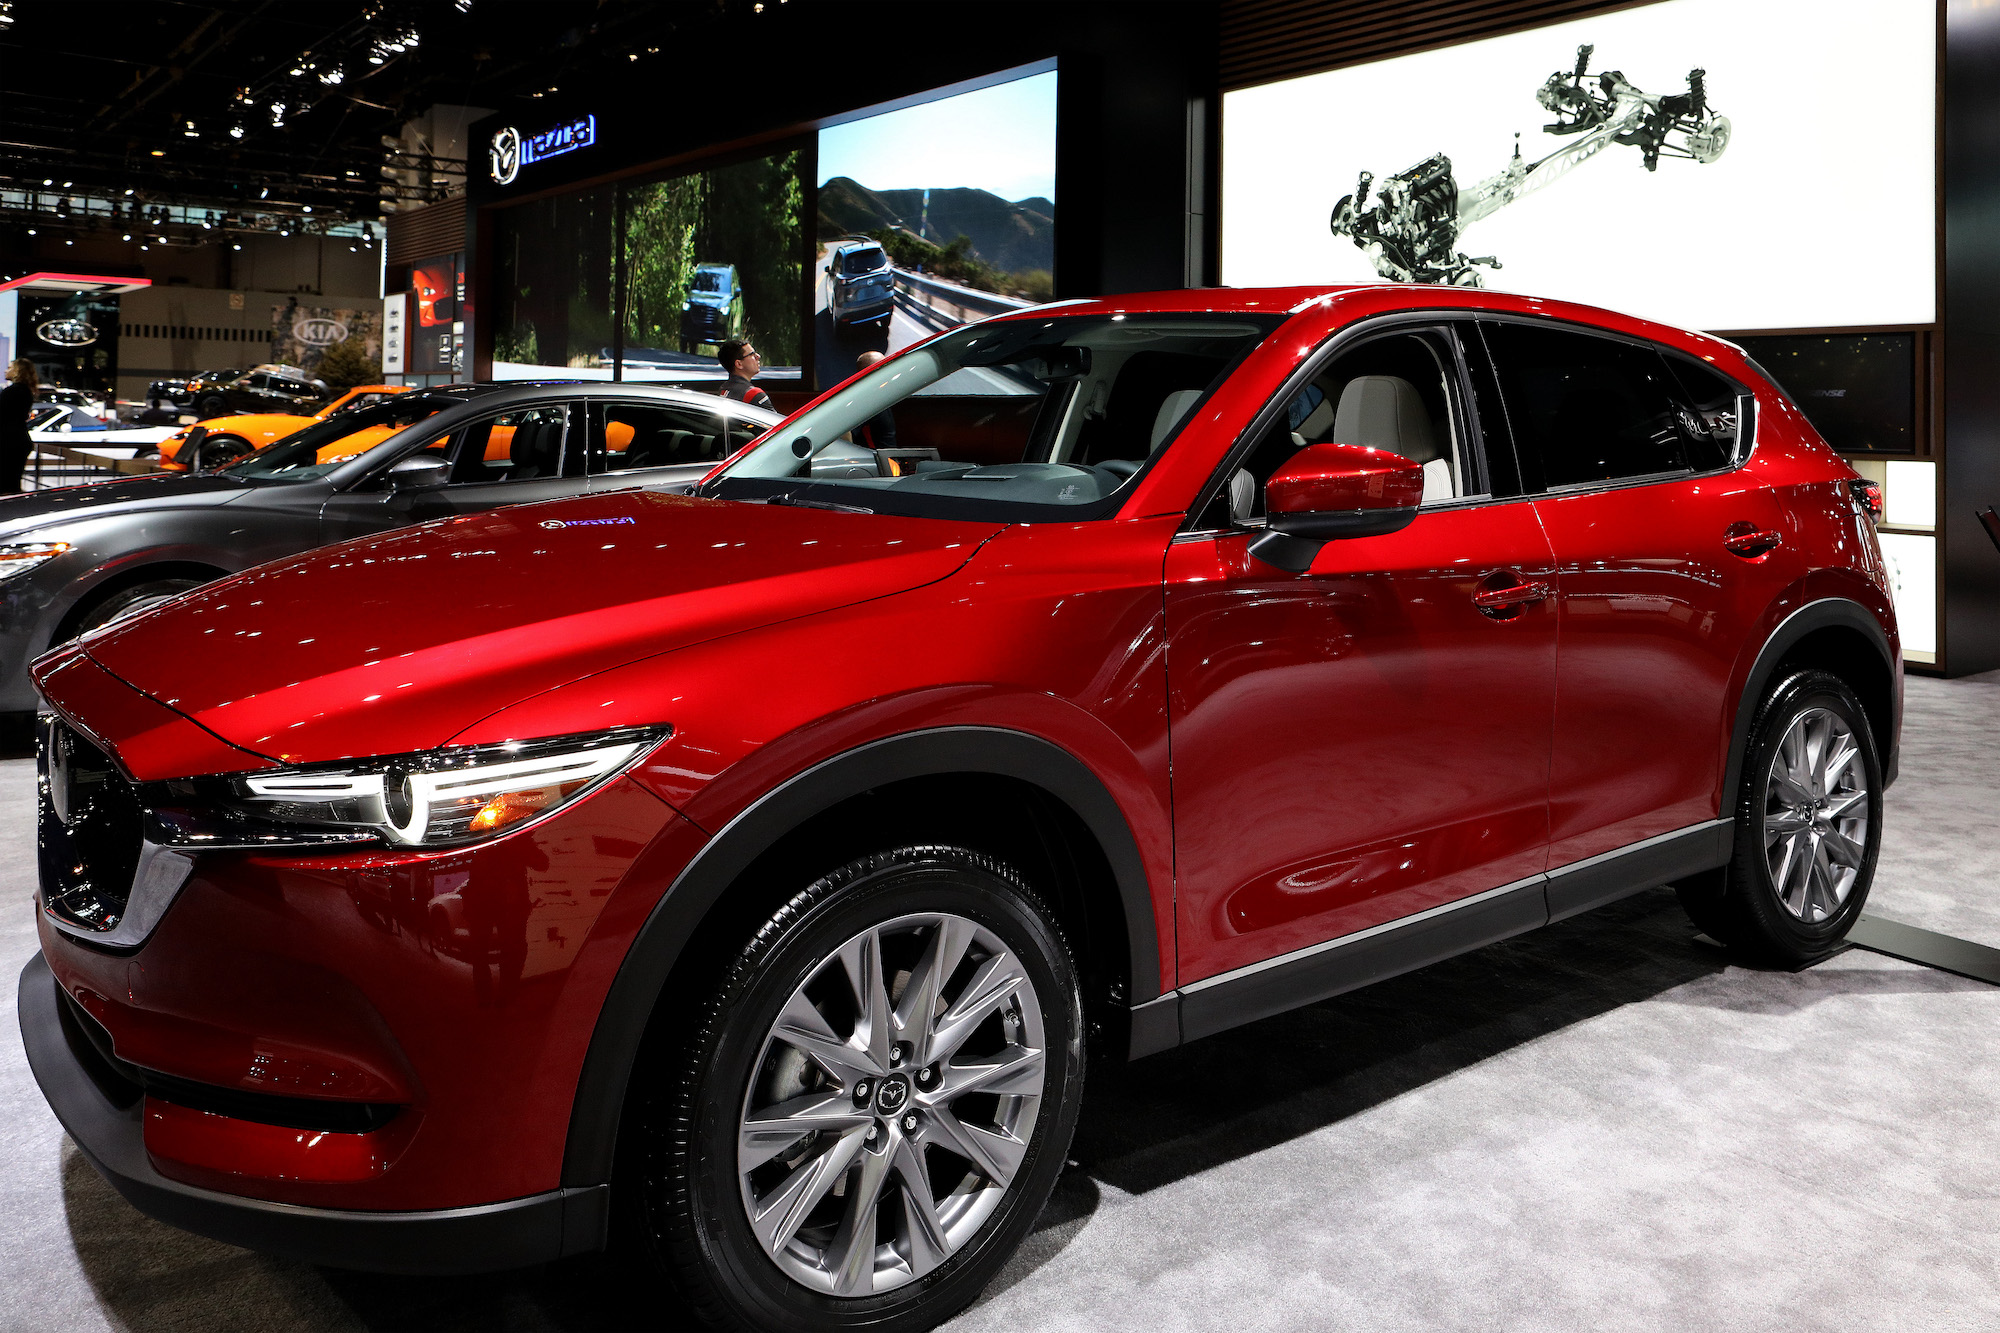 2019 Mazda CX-5 is on display at the 111th Annual Chicago Auto Show at McCormick Place in Chicago, Illinois on February 8, 2019.